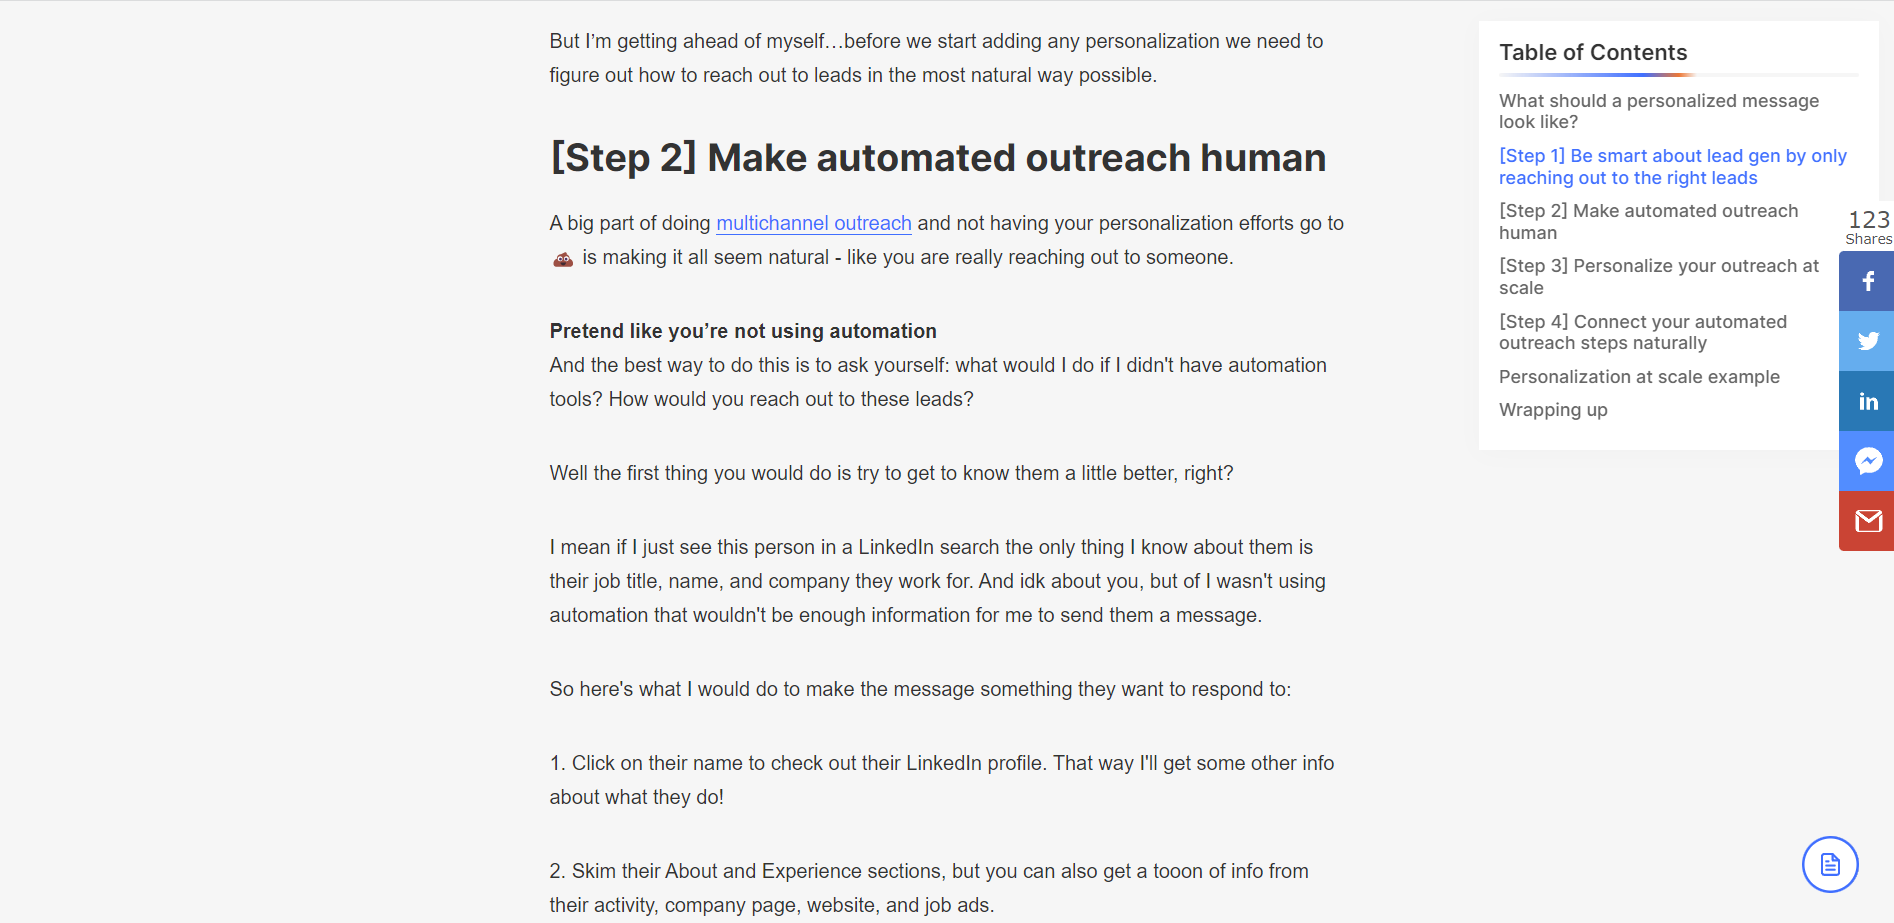 Step 2 is making automated outreach human 